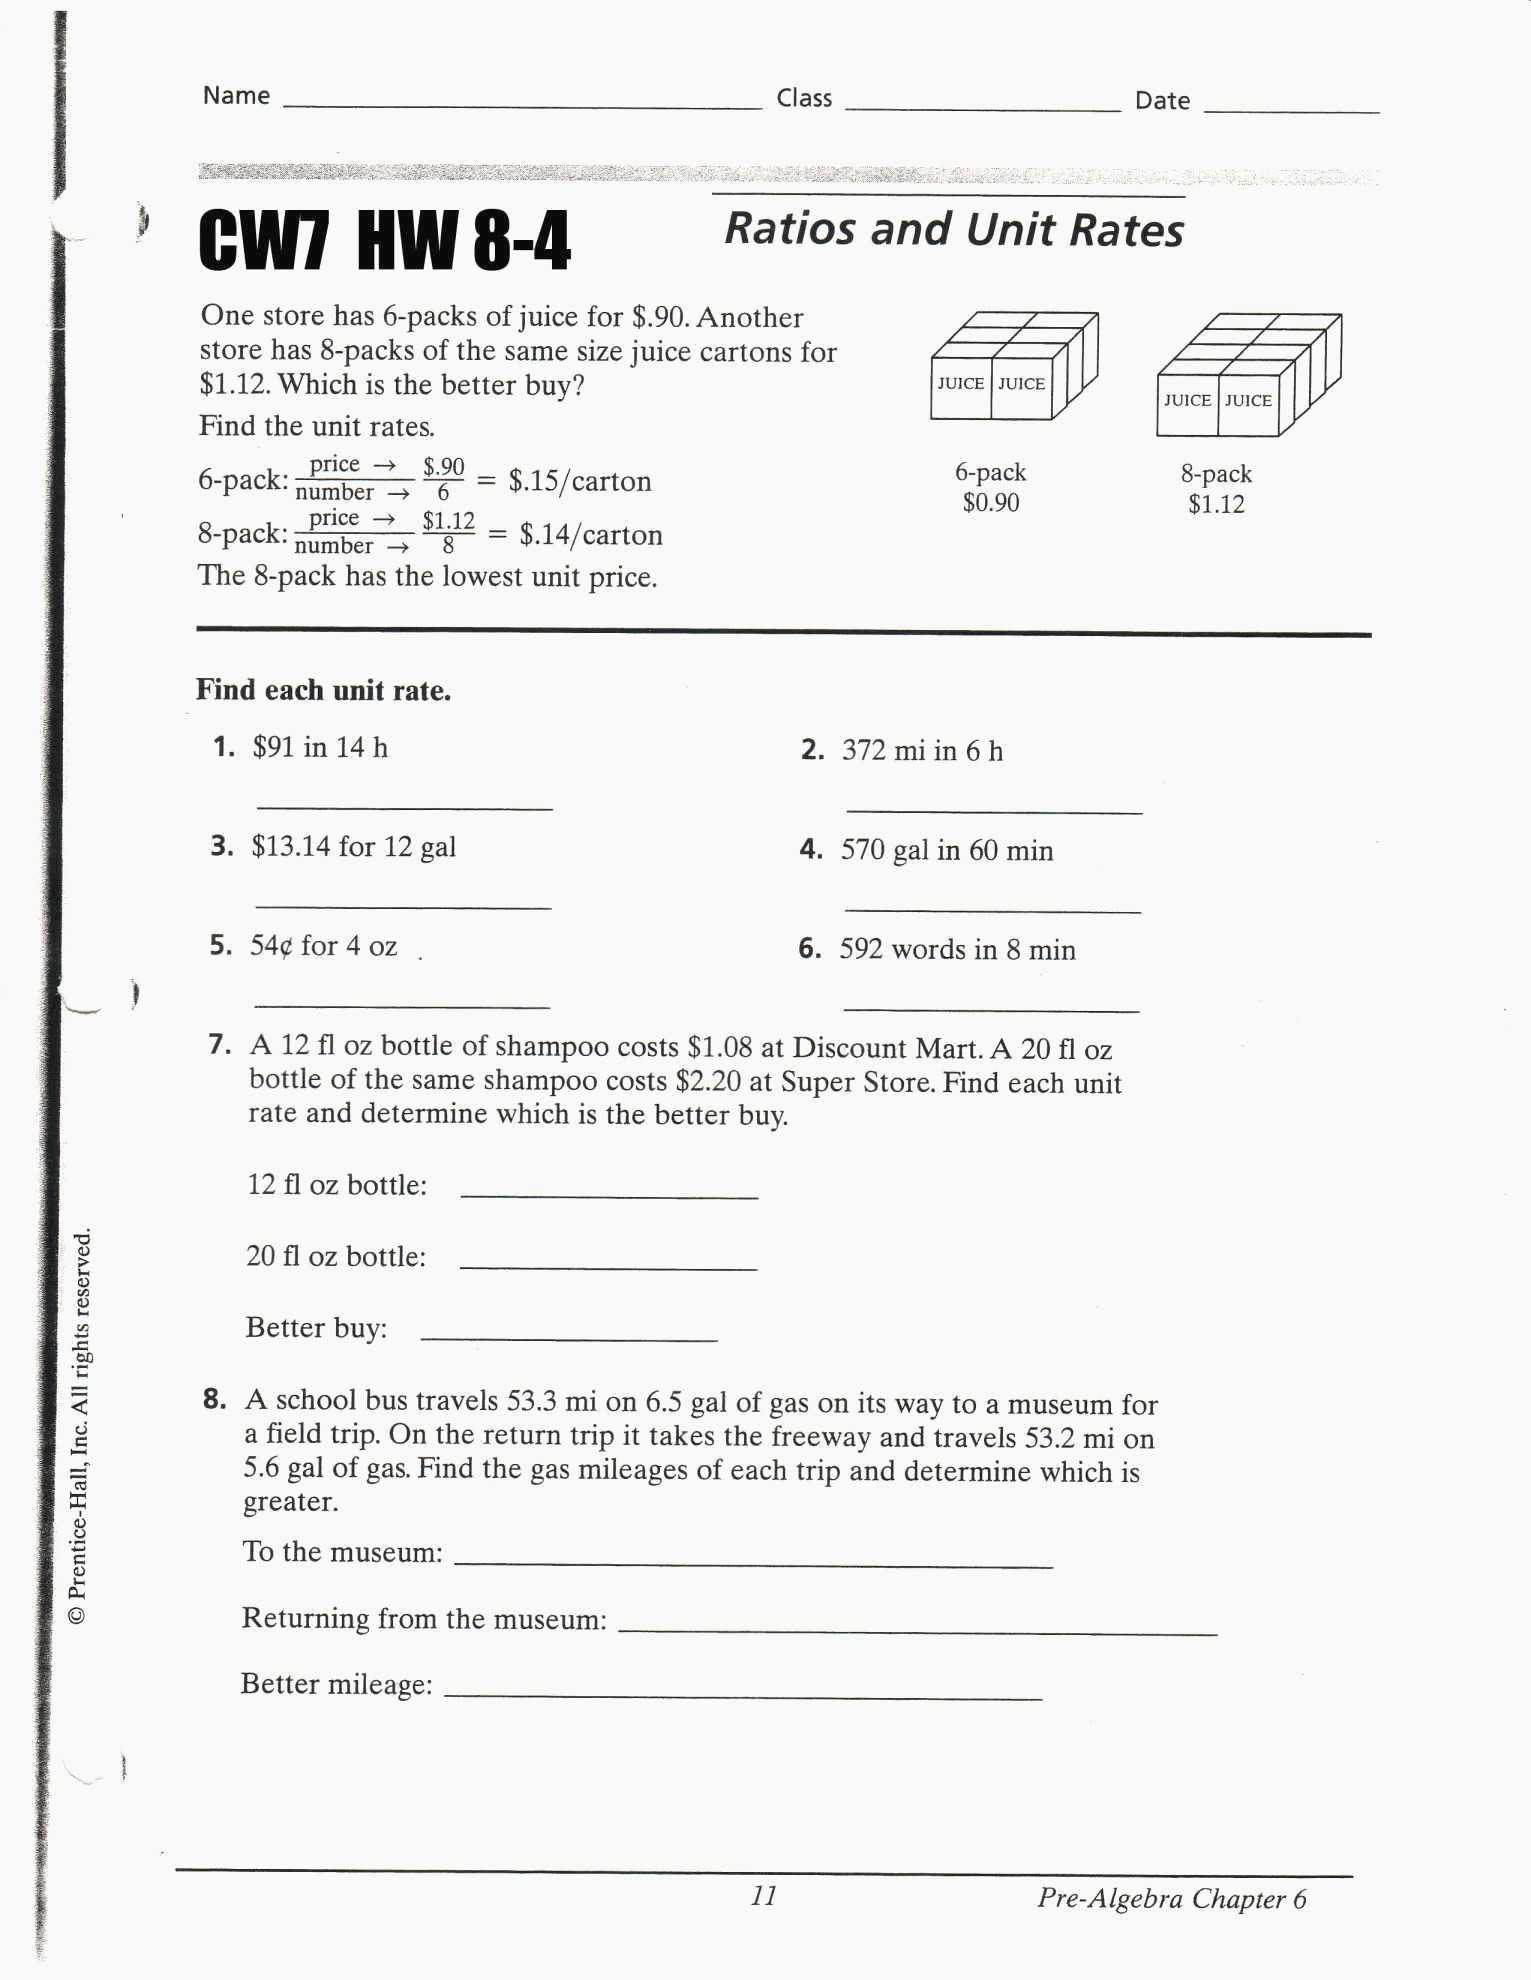 Speed and Velocity Worksheet Along with Time Management Worksheet Wp Landingpages